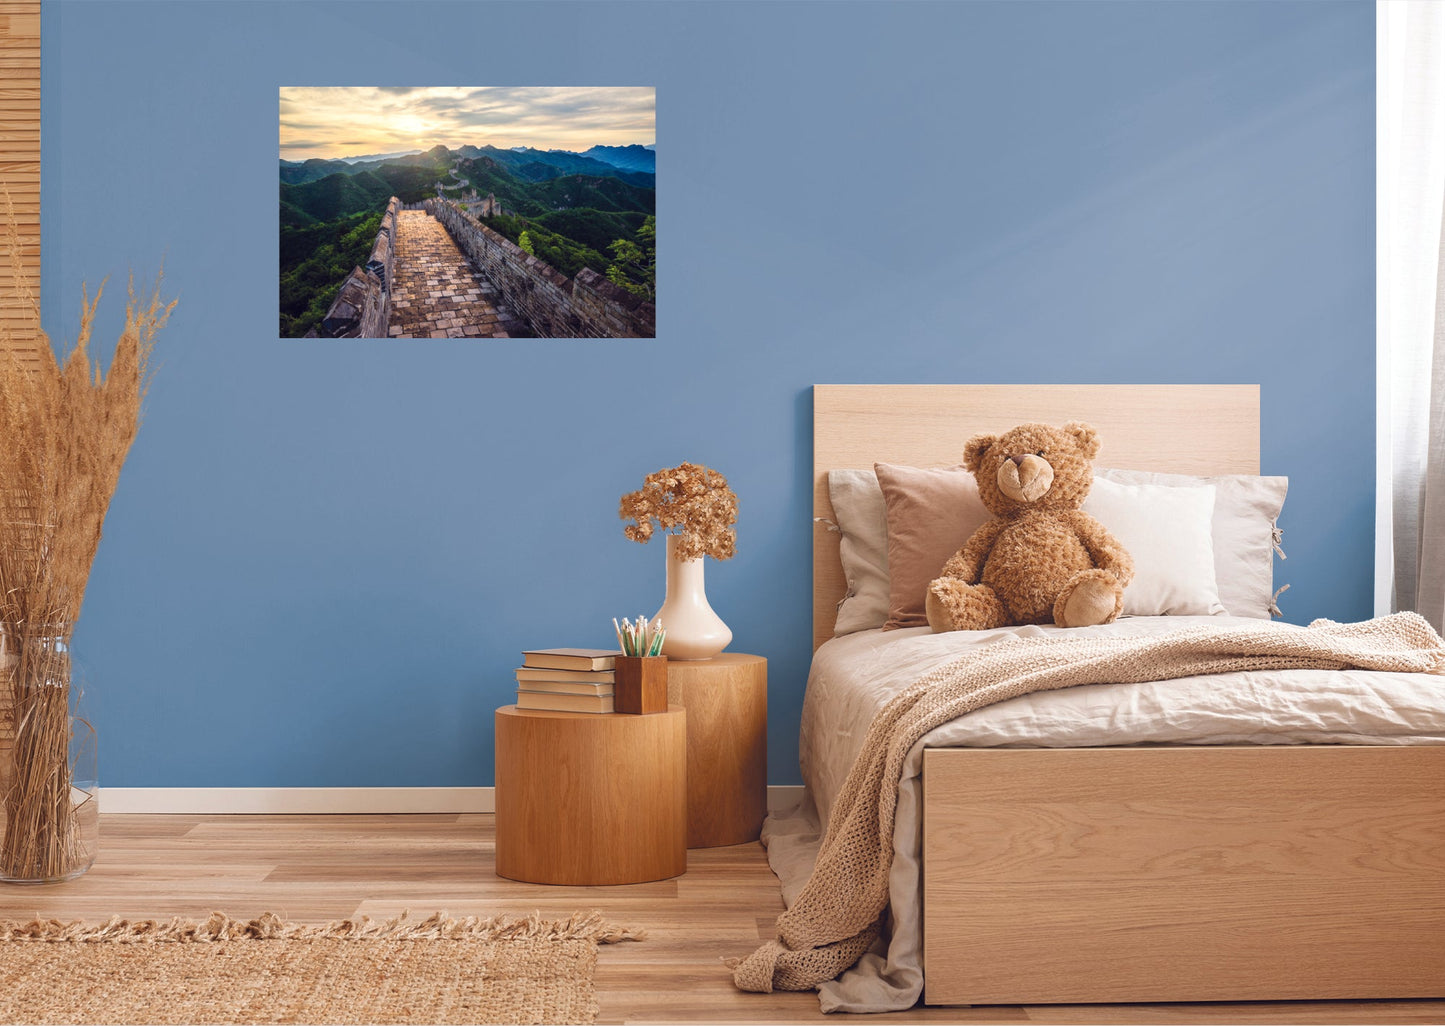 Popular Landmarks: The Great Wall of China Realistic Poster - Removable Adhesive Decal